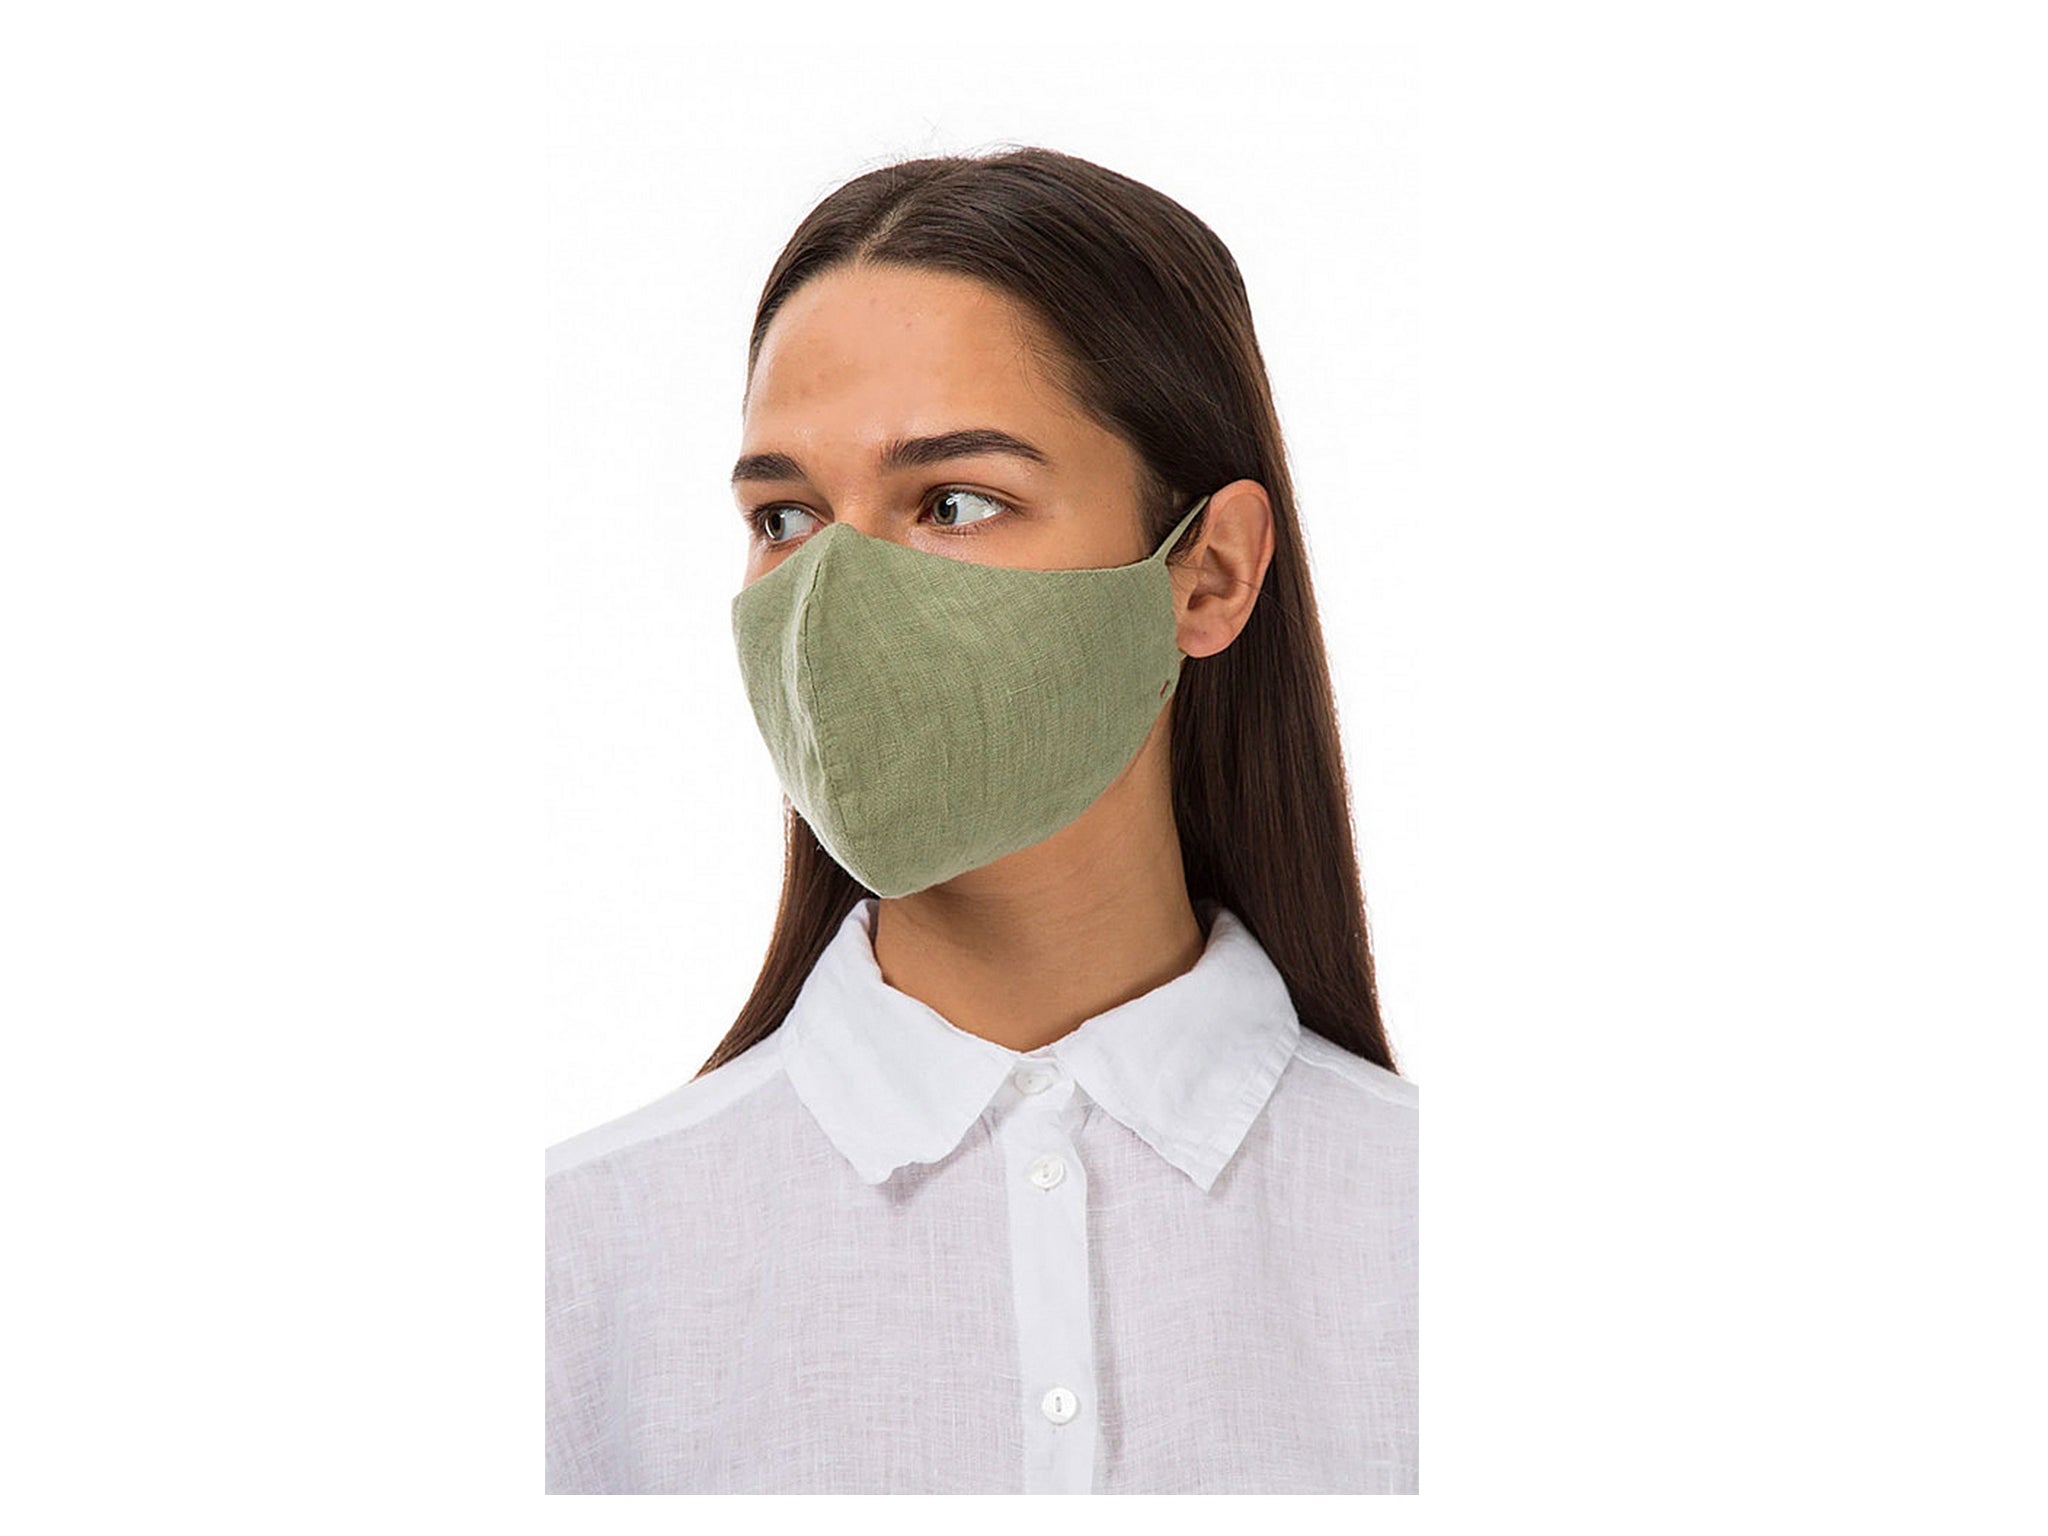 Fashion brand Plumo is making its masks using lightweight, breathable linen